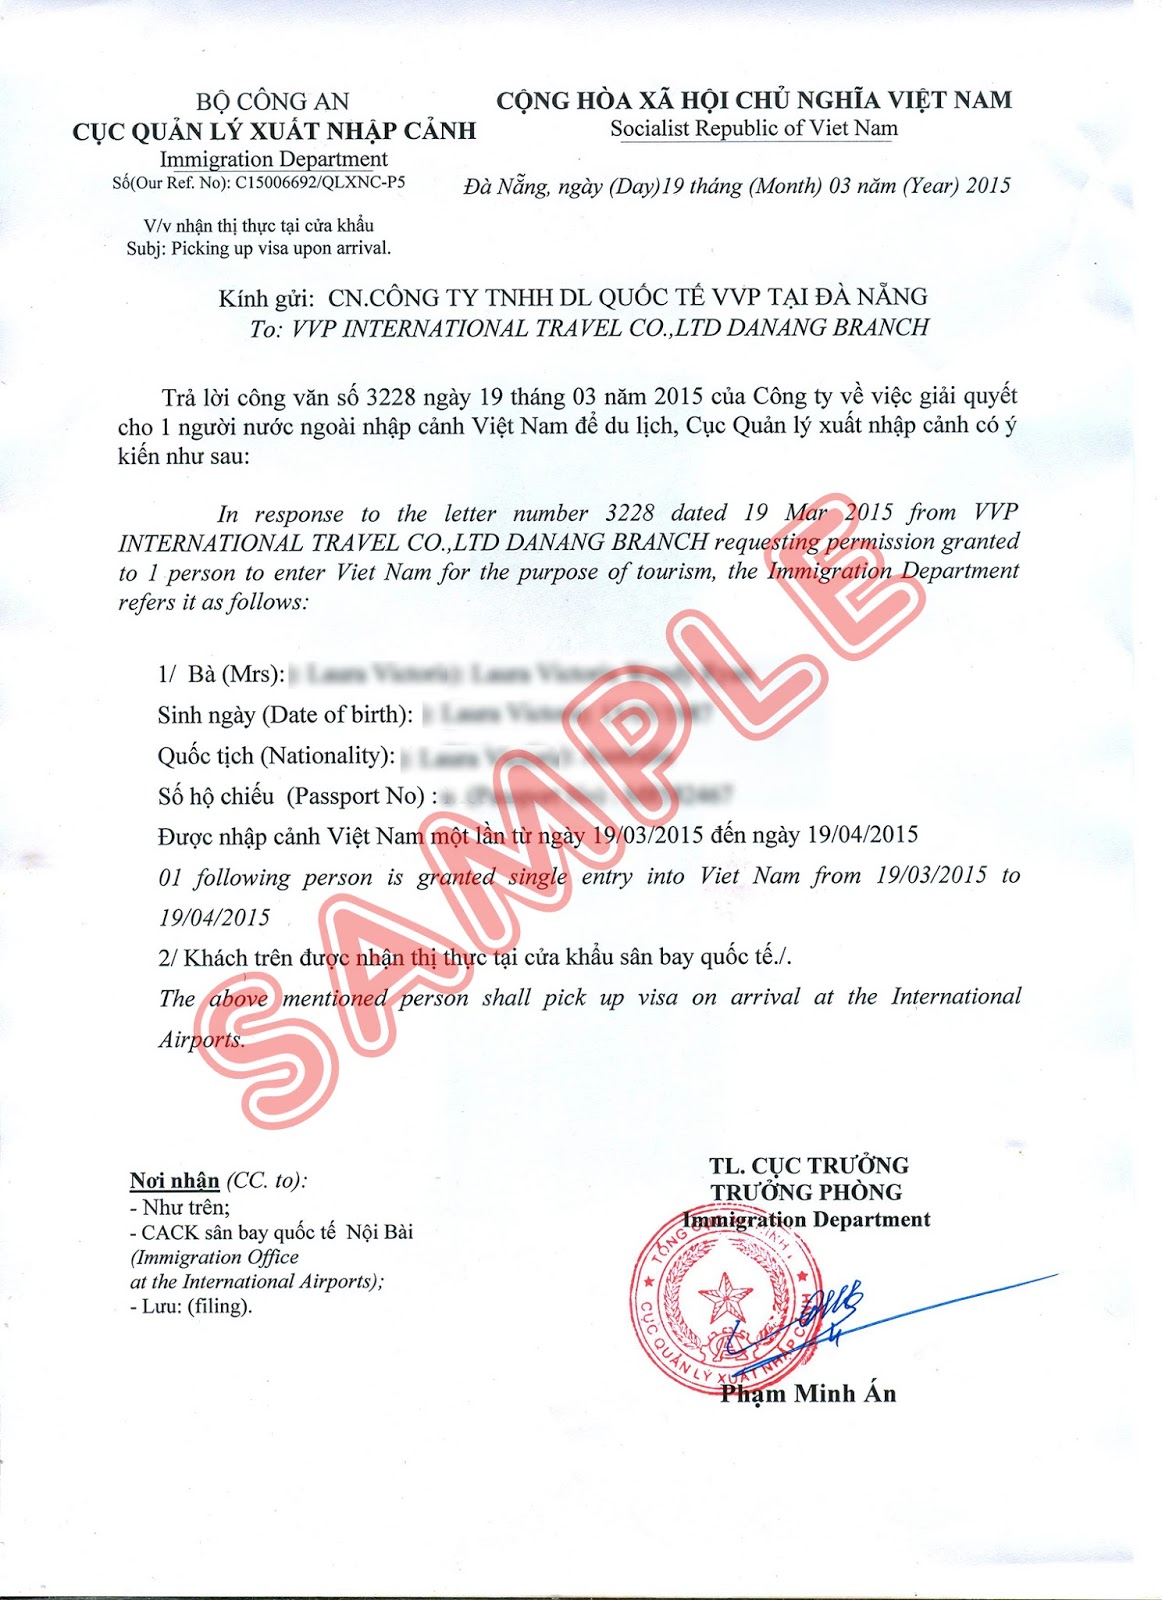 What Is The Approval Letter For Vietnam Visa And How 2096